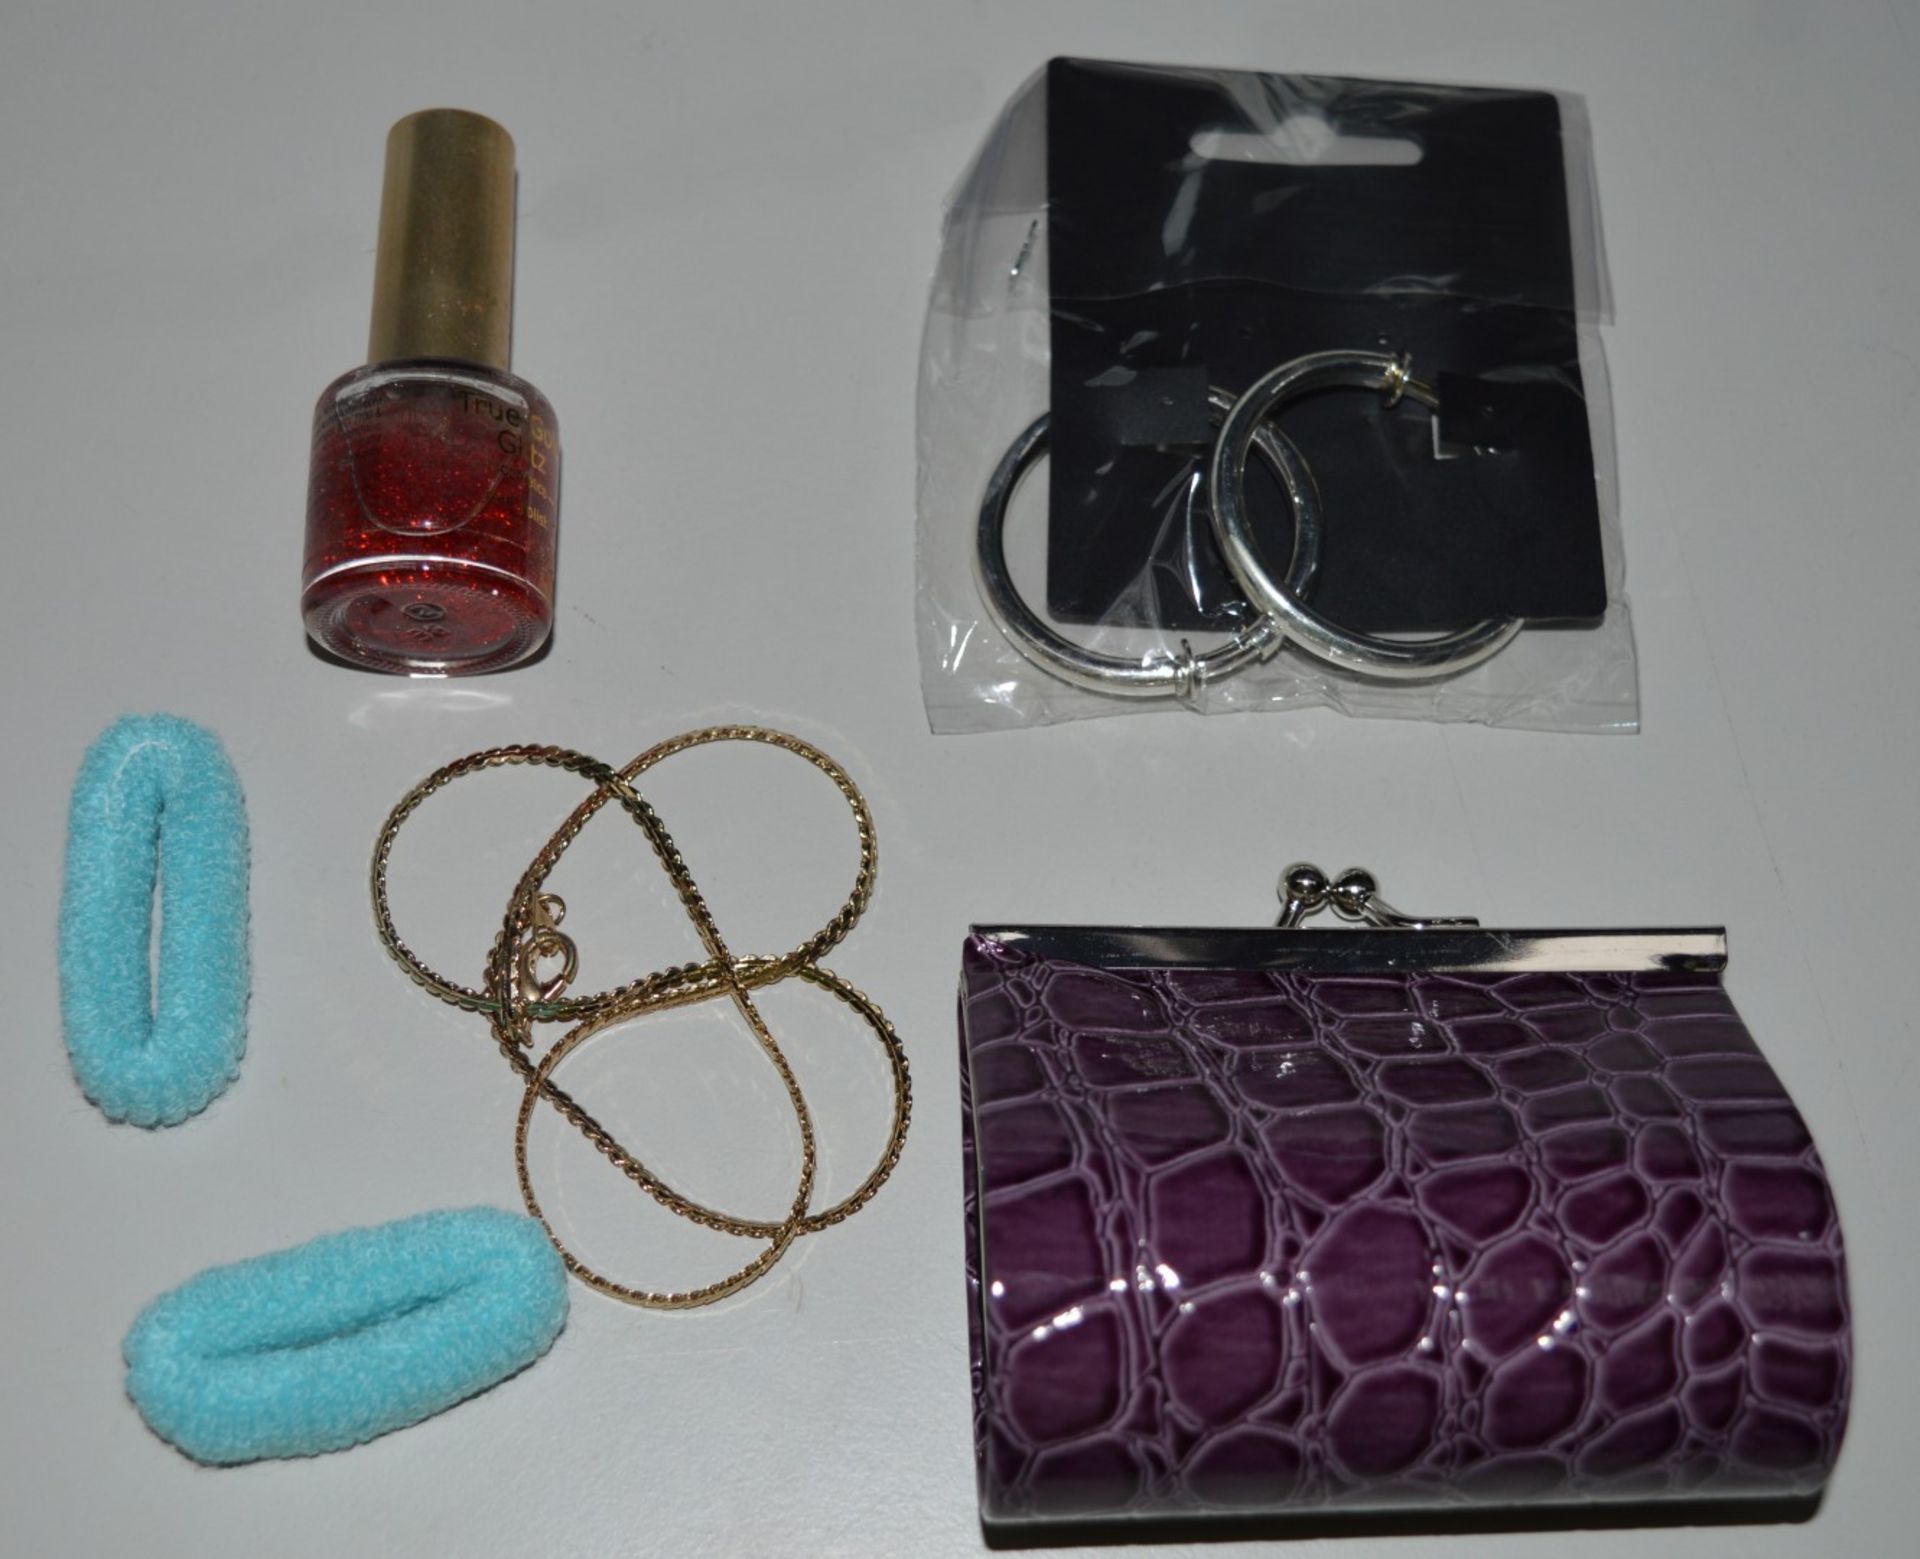 50 x Girls Beauty Gift Sets - Each Set Includes Items Such as a Stylish Purse, Ear Rings, Hair - Image 11 of 13